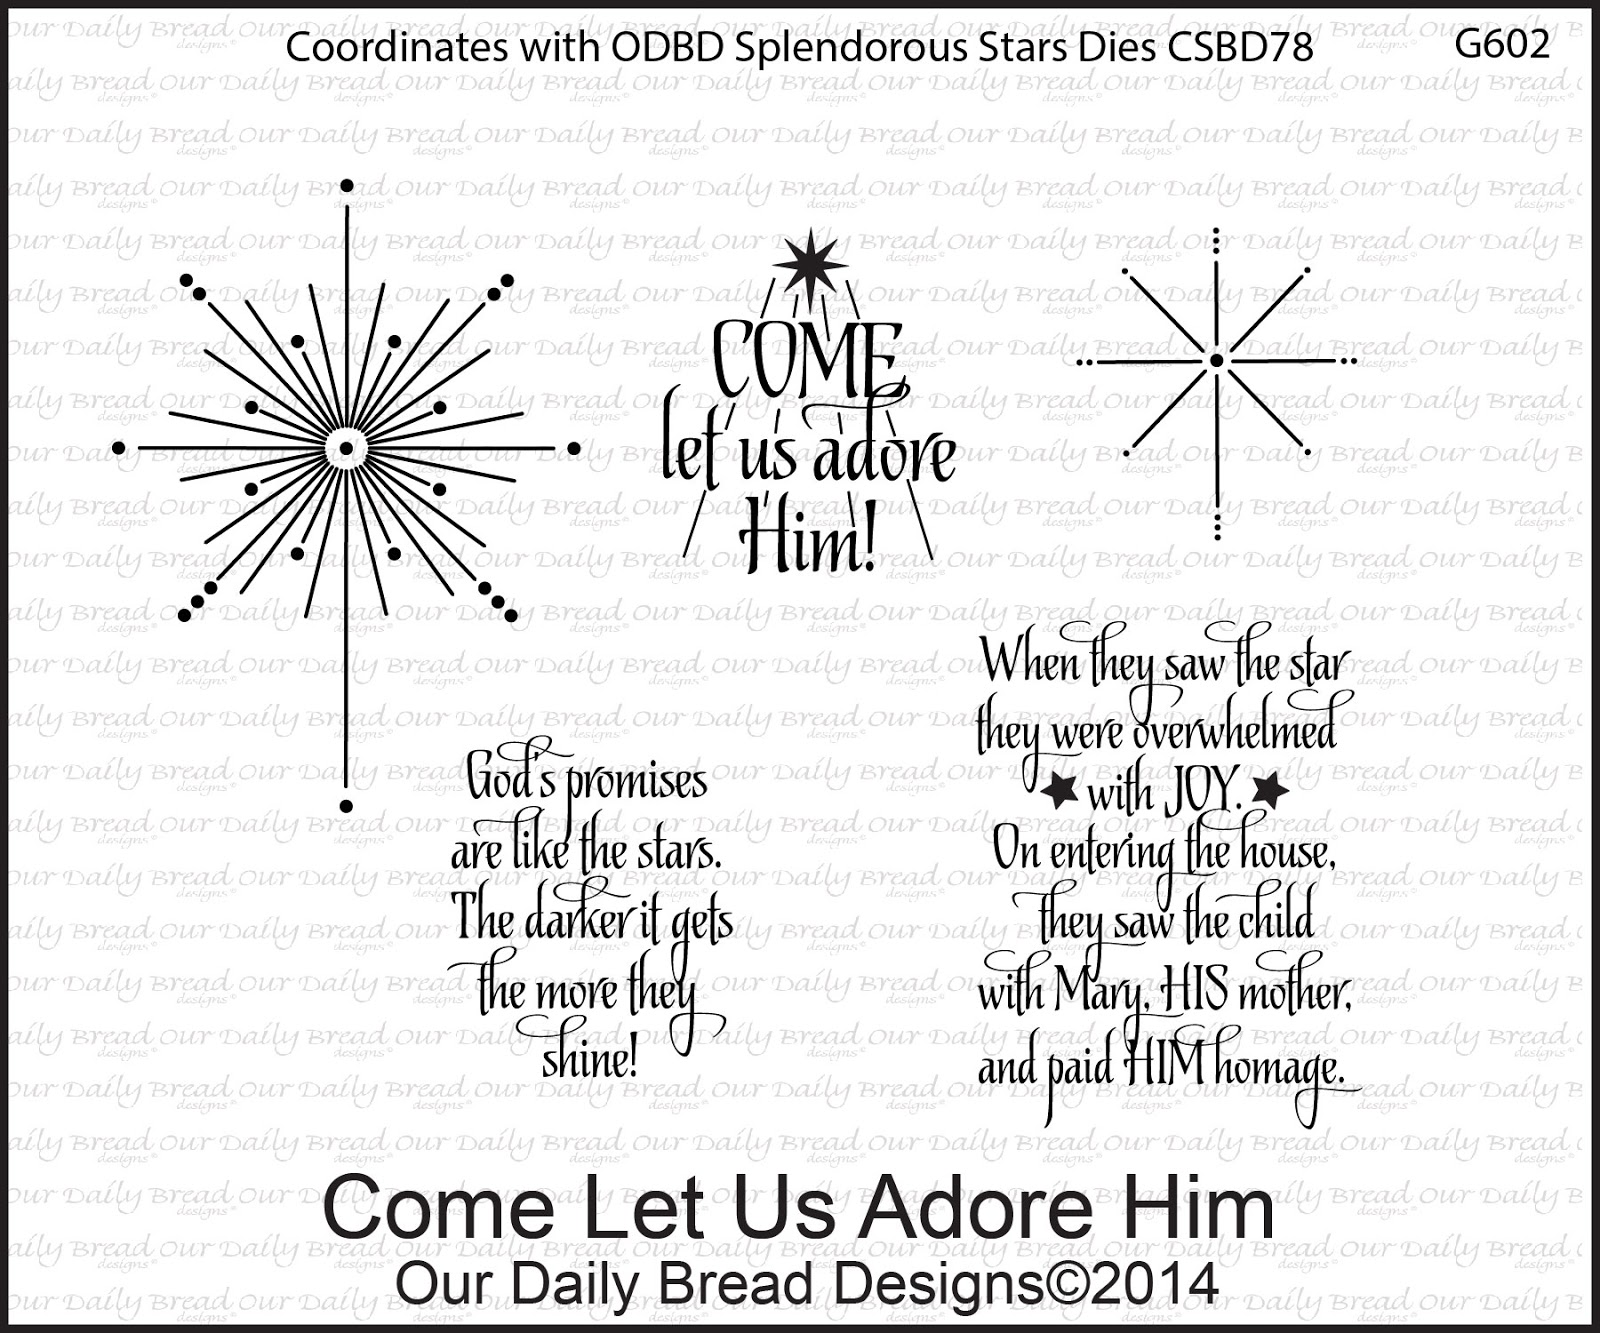 https://www.ourdailybreaddesigns.com/index.php/g602-come-let-us-adore-him.html